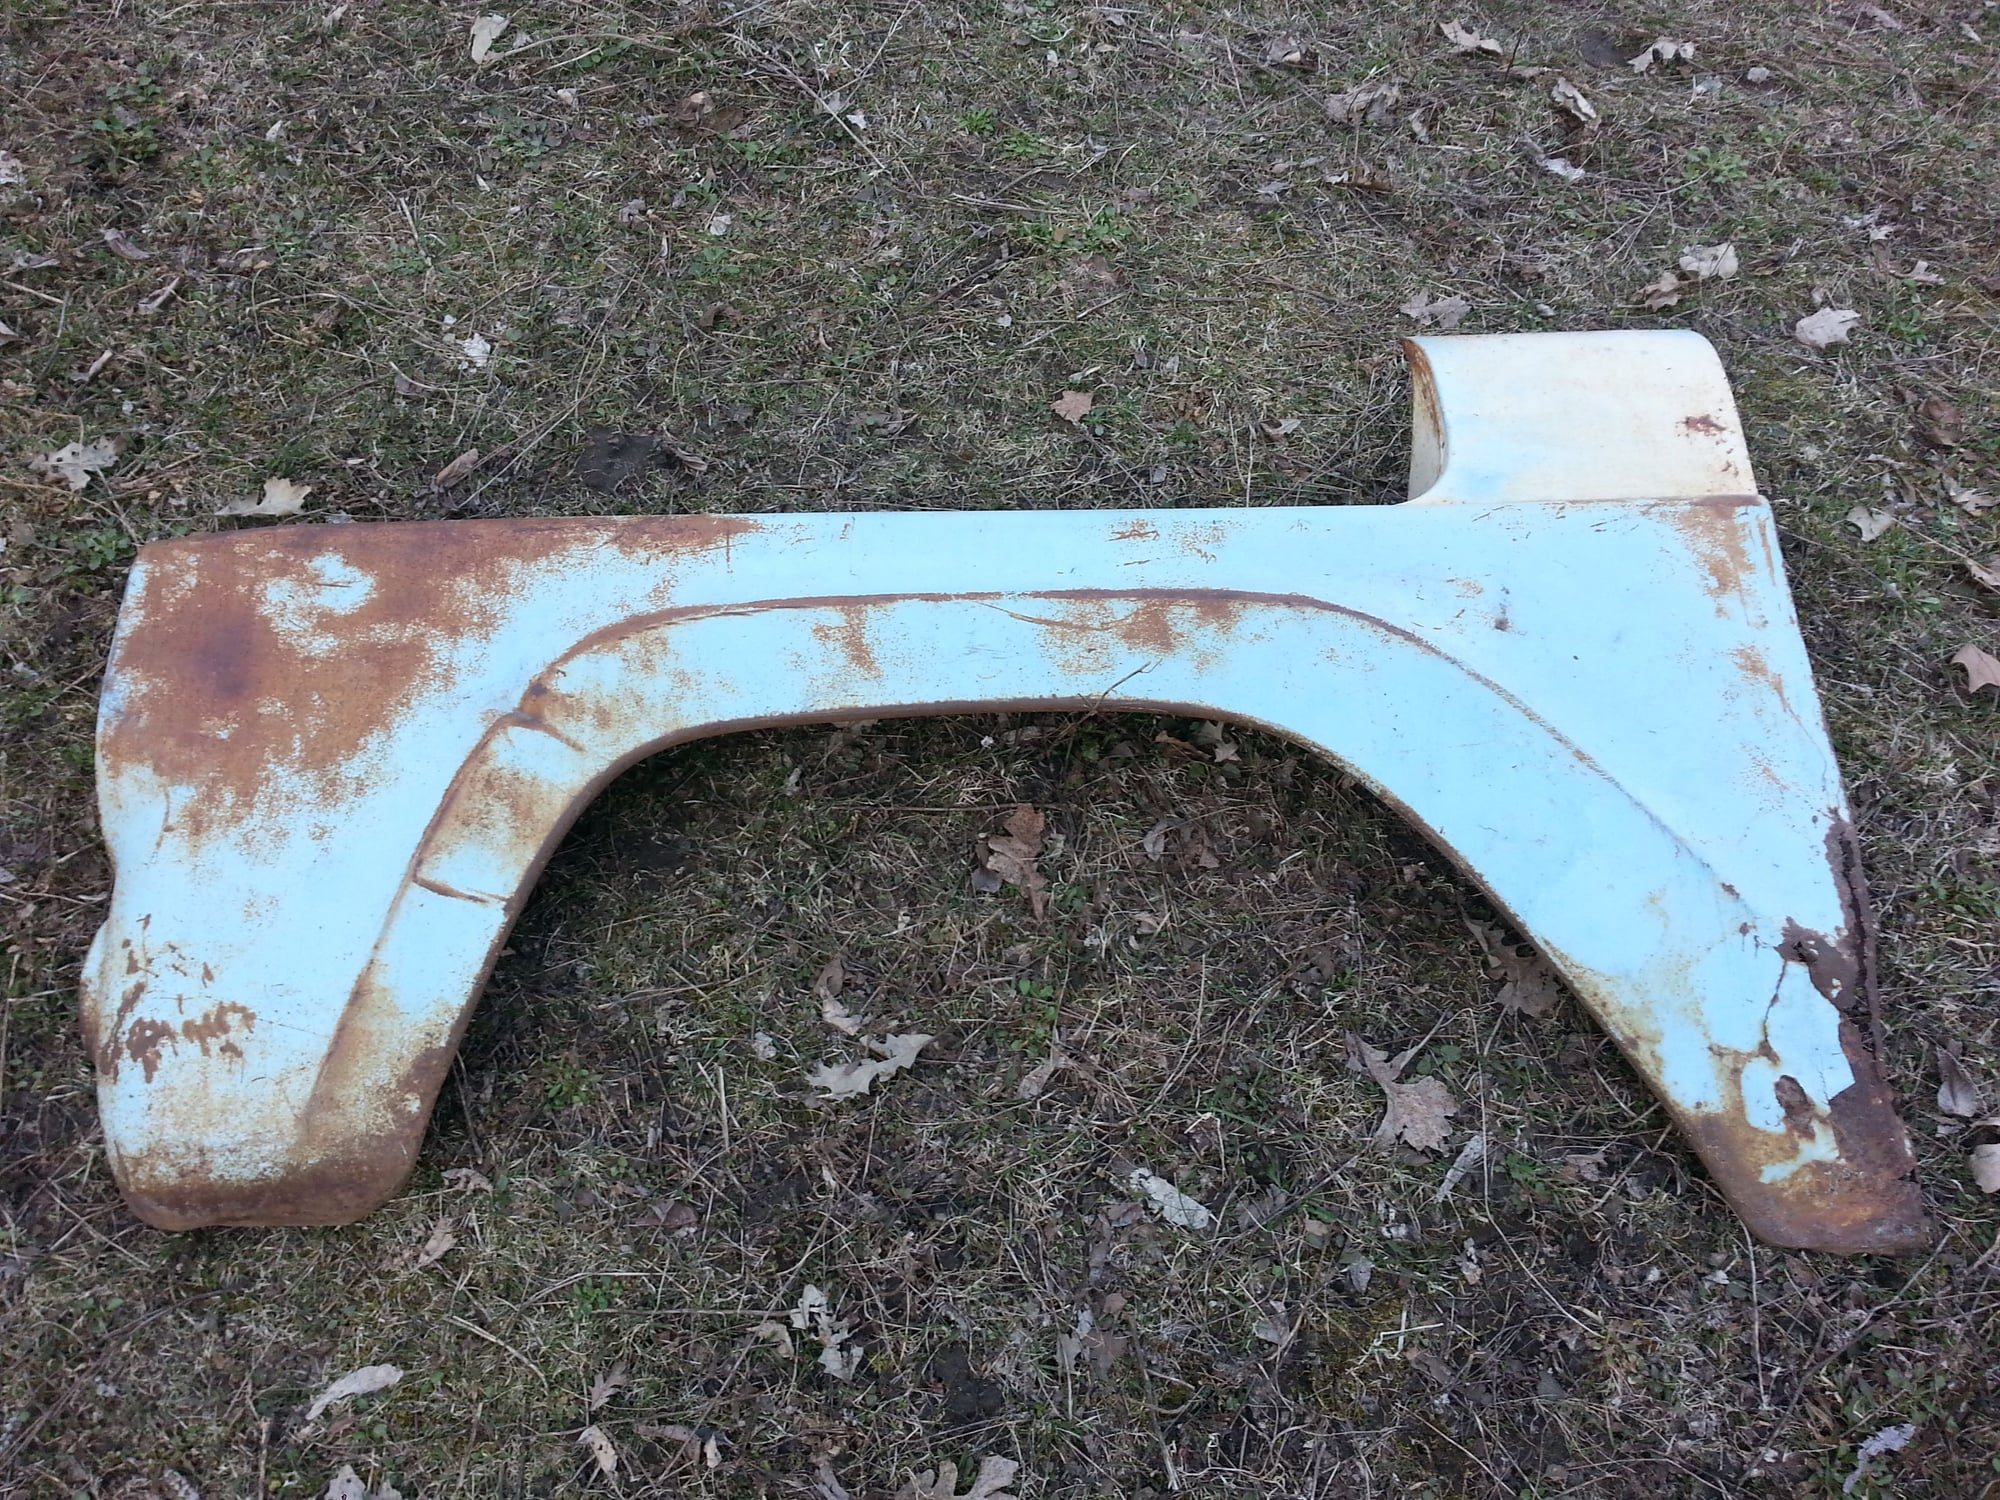 Exterior Body Parts - 1958 F-100 Parts FREE for a Good Home - Used - 1957 to 1960 Ford F-100 - New Richmond, WI 54017, United States